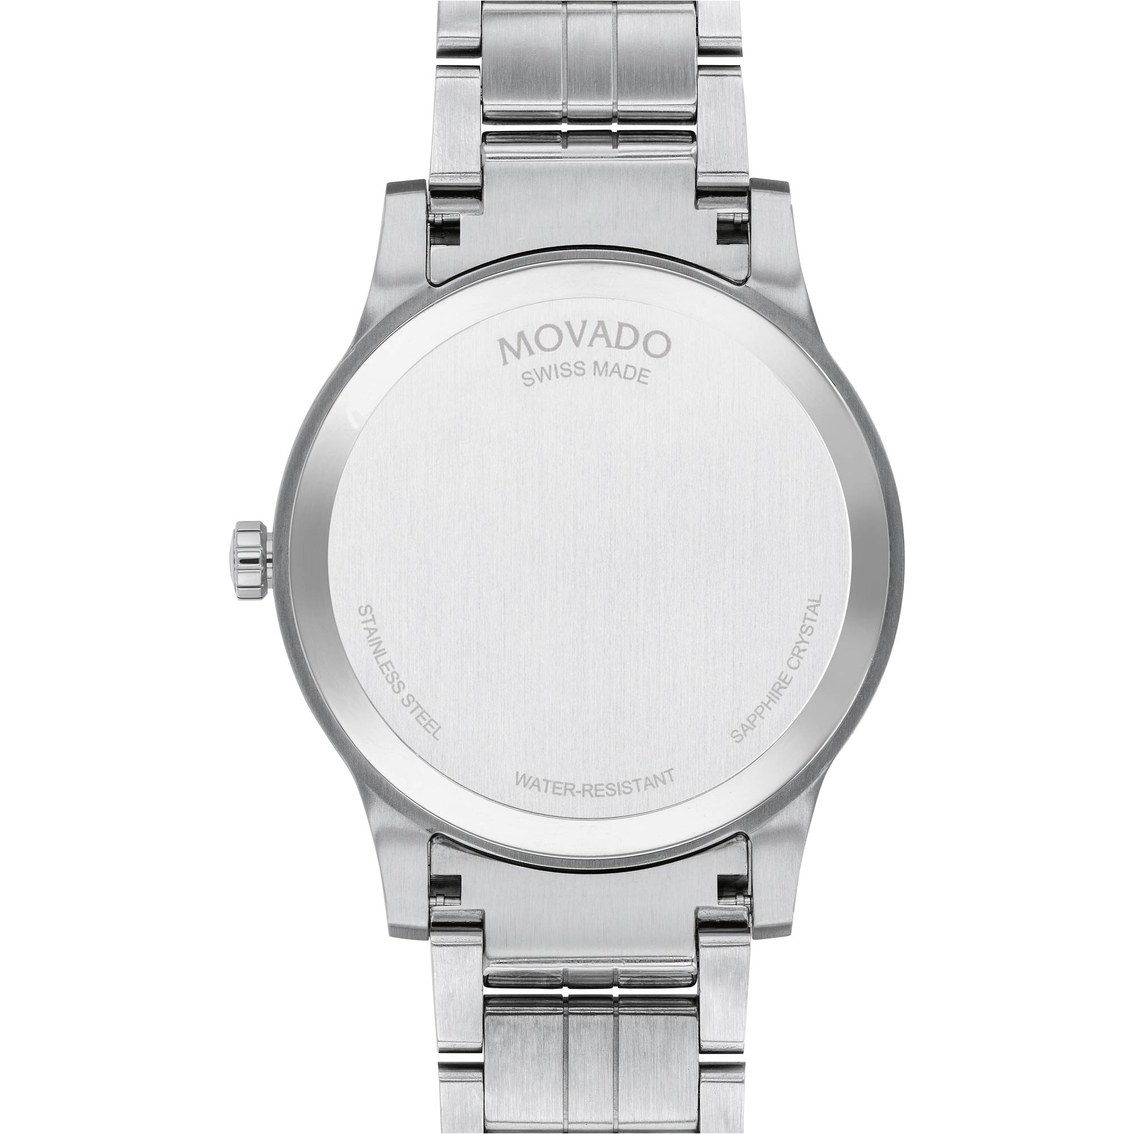 Movado Men's Military Special Watch 0607534 - Image 2 of 3